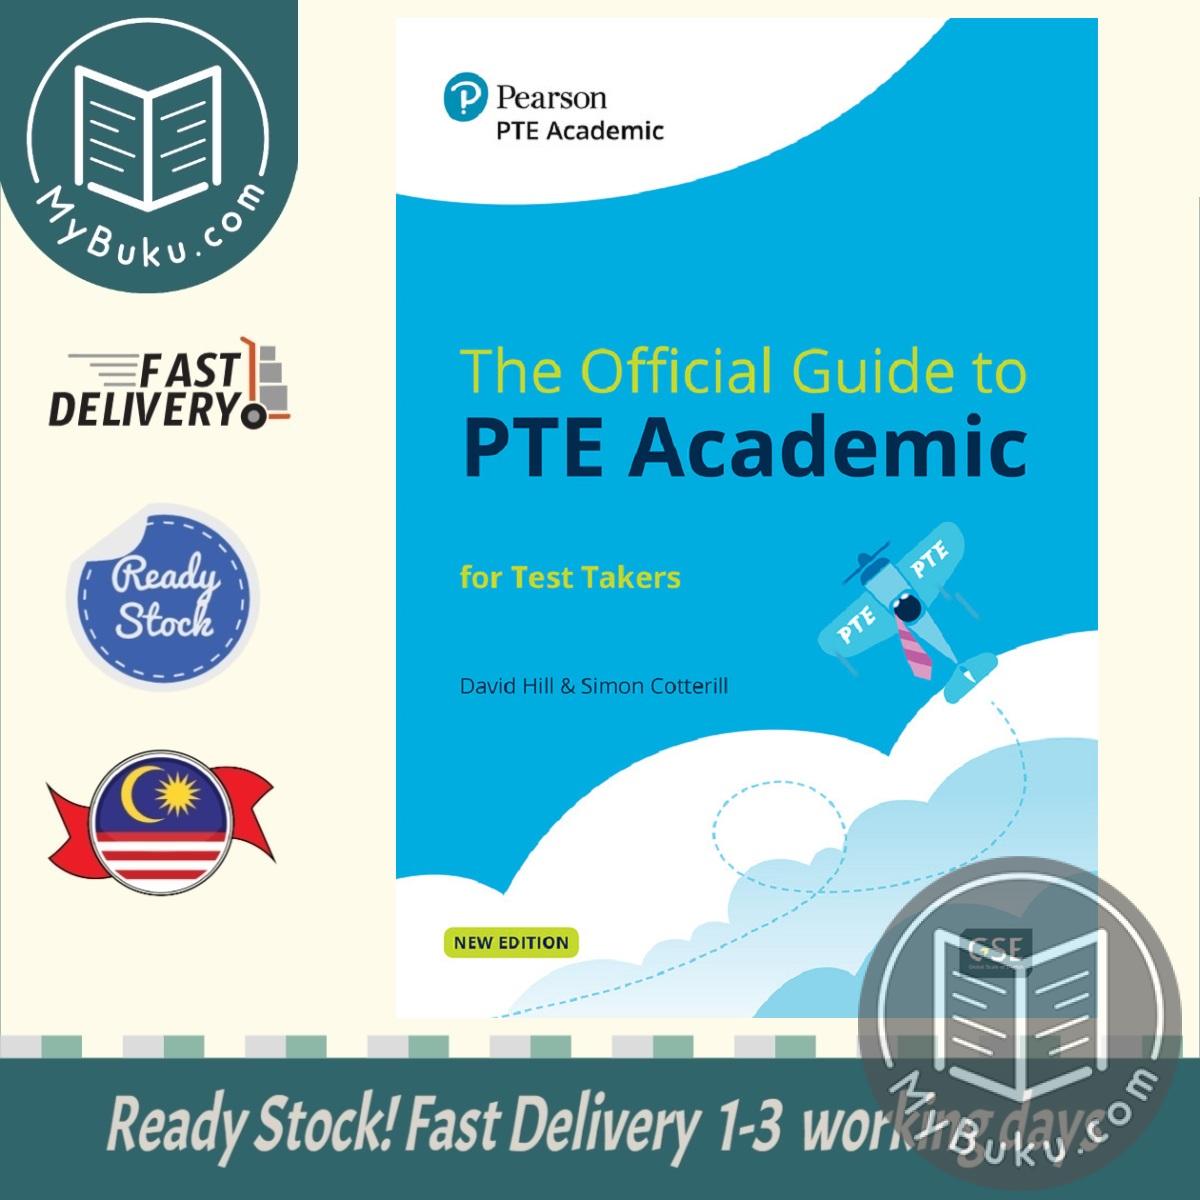 The Official Guide to PTE Academic for Test Takers with (Digital Resources) - David Hill - 9781292341989 - Pearson Education